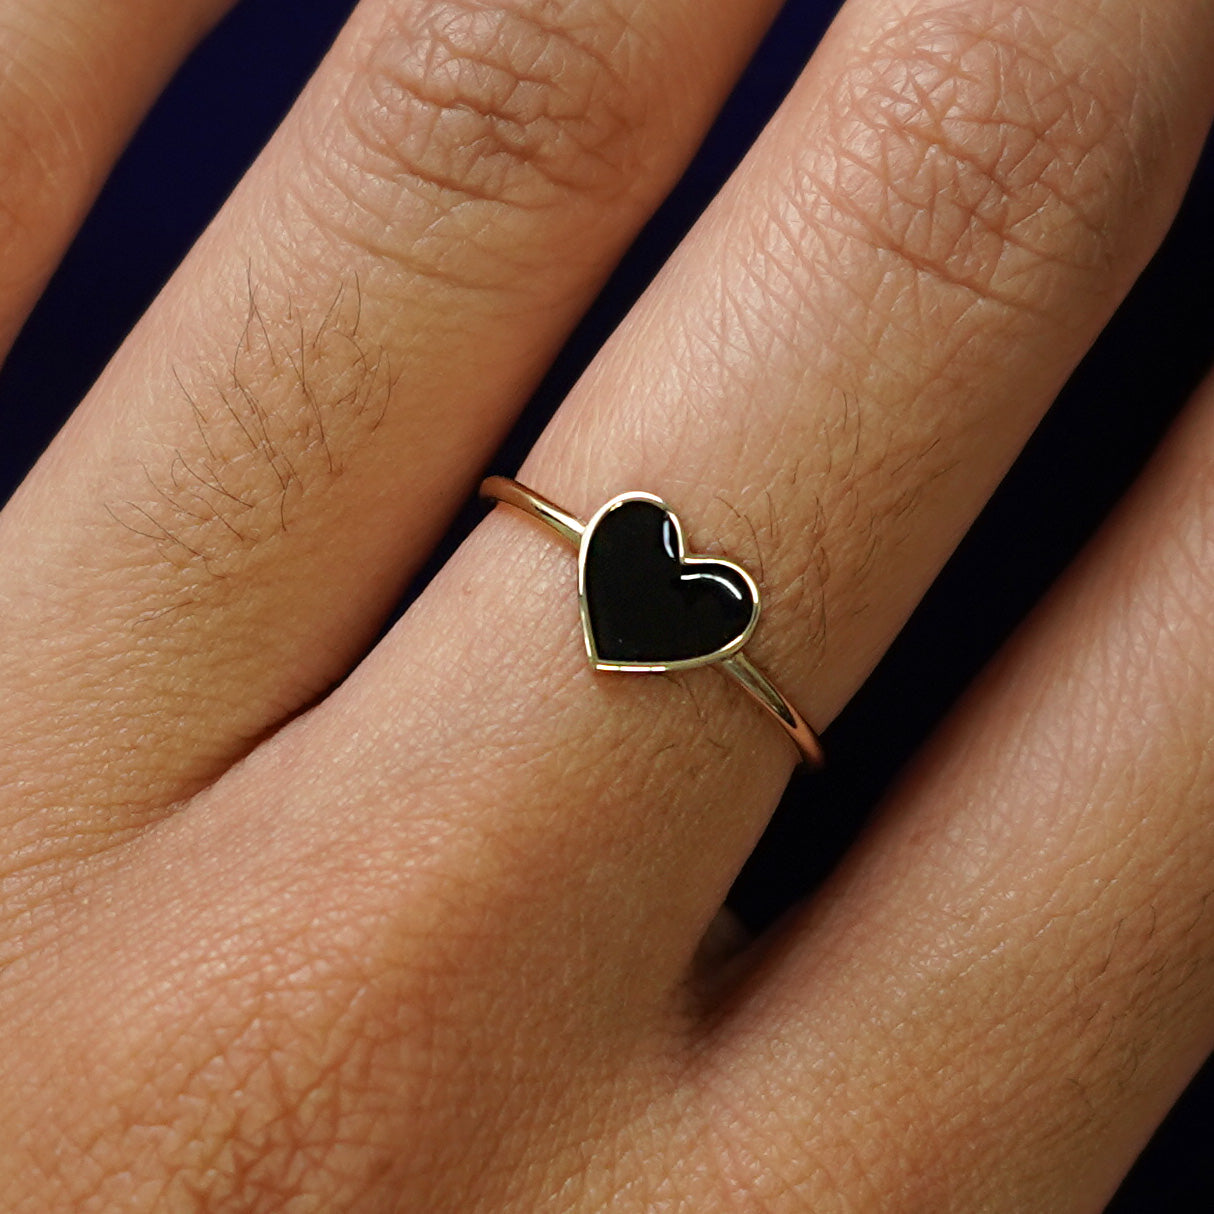 Close up view of a model's hand wearing a yellow gold black enamel heart ring